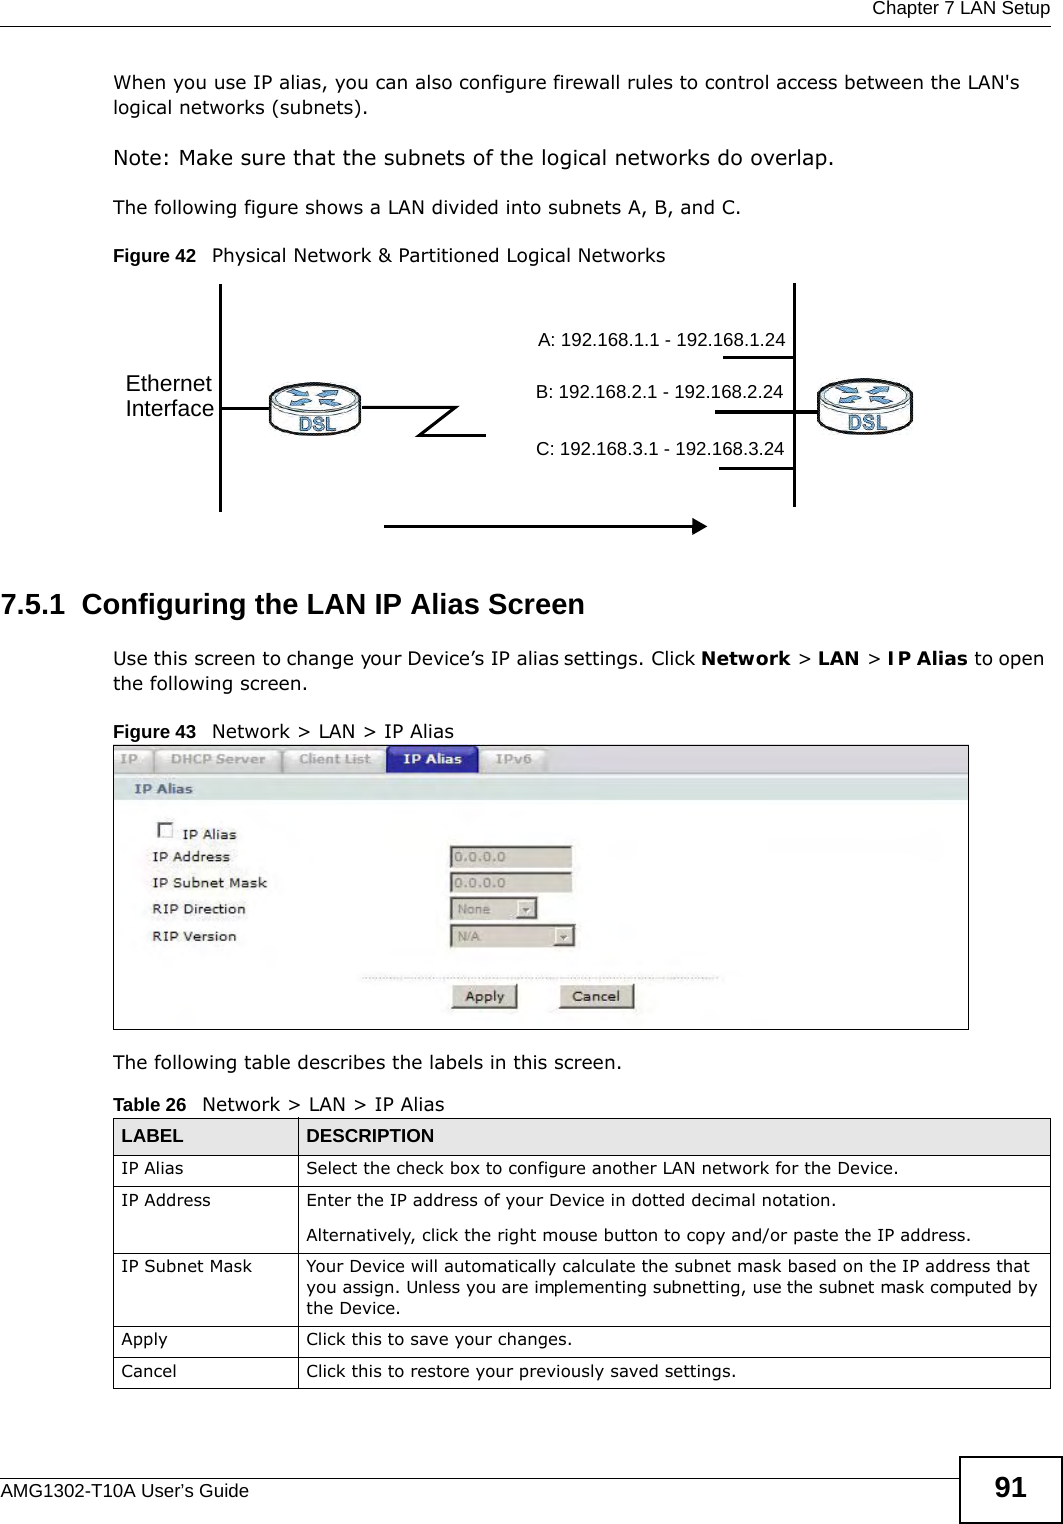  Chapter 7 LAN SetupAMG1302-T10A User’s Guide 91When you use IP alias, you can also configure firewall rules to control access between the LAN&apos;s logical networks (subnets).Note: Make sure that the subnets of the logical networks do overlap.The following figure shows a LAN divided into subnets A, B, and C.Figure 42   Physical Network &amp; Partitioned Logical Networks7.5.1  Configuring the LAN IP Alias ScreenUse this screen to change your Device’s IP alias settings. Click Network &gt; LAN &gt; IP Alias to open the following screen.Figure 43   Network &gt; LAN &gt; IP AliasThe following table describes the labels in this screen. EthernetInterfaceA: 192.168.1.1 - 192.168.1.24B: 192.168.2.1 - 192.168.2.24C: 192.168.3.1 - 192.168.3.24Table 26   Network &gt; LAN &gt; IP Alias LABEL DESCRIPTIONIP Alias  Select the check box to configure another LAN network for the Device.IP Address Enter the IP address of your Device in dotted decimal notation. Alternatively, click the right mouse button to copy and/or paste the IP address.IP Subnet Mask Your Device will automatically calculate the subnet mask based on the IP address that you assign. Unless you are implementing subnetting, use the subnet mask computed by the Device.Apply Click this to save your changes.Cancel Click this to restore your previously saved settings.